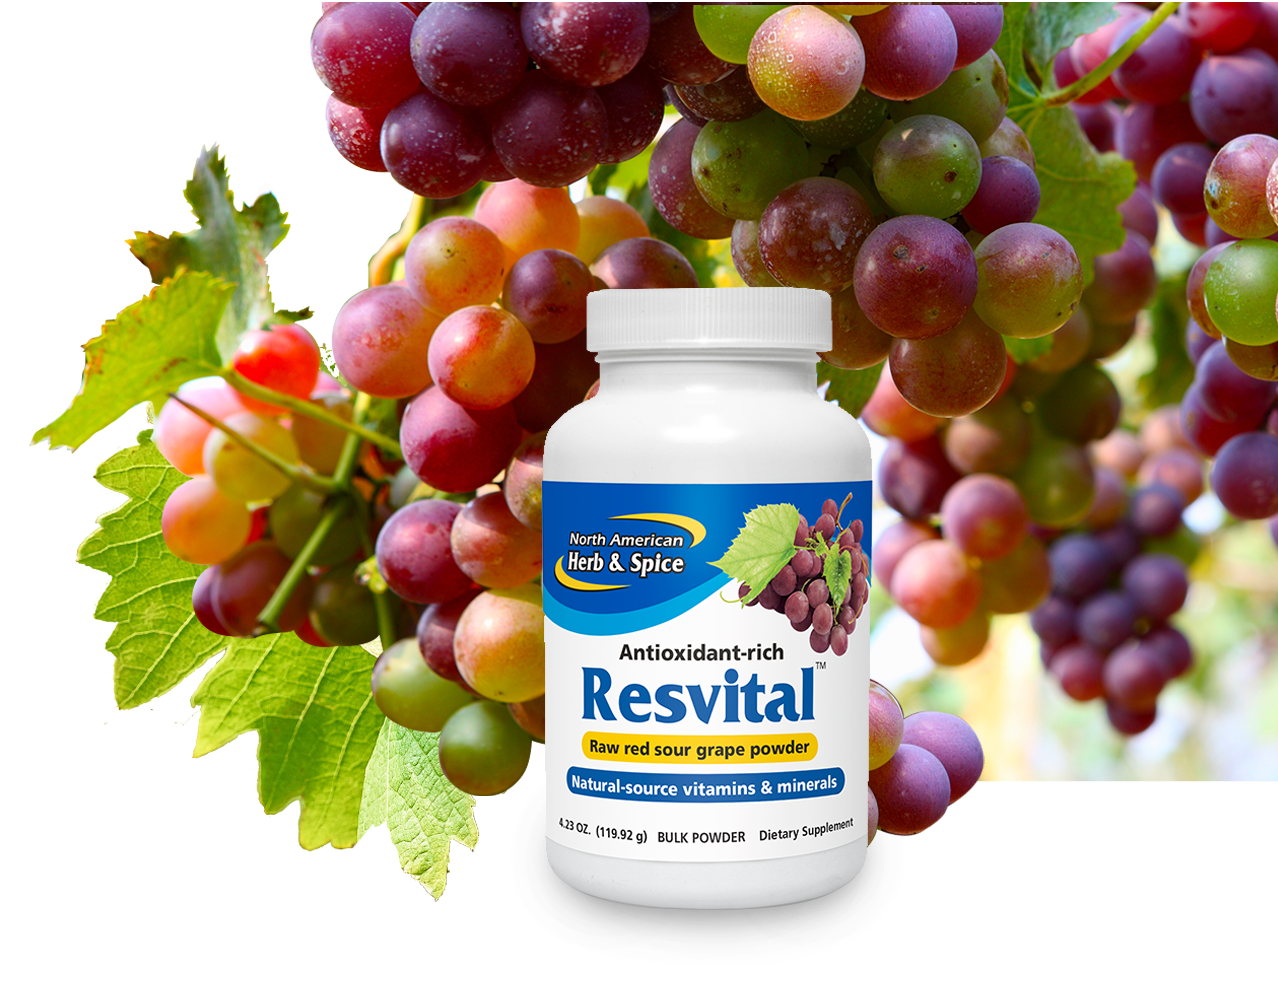 Red grapes with Resvital product